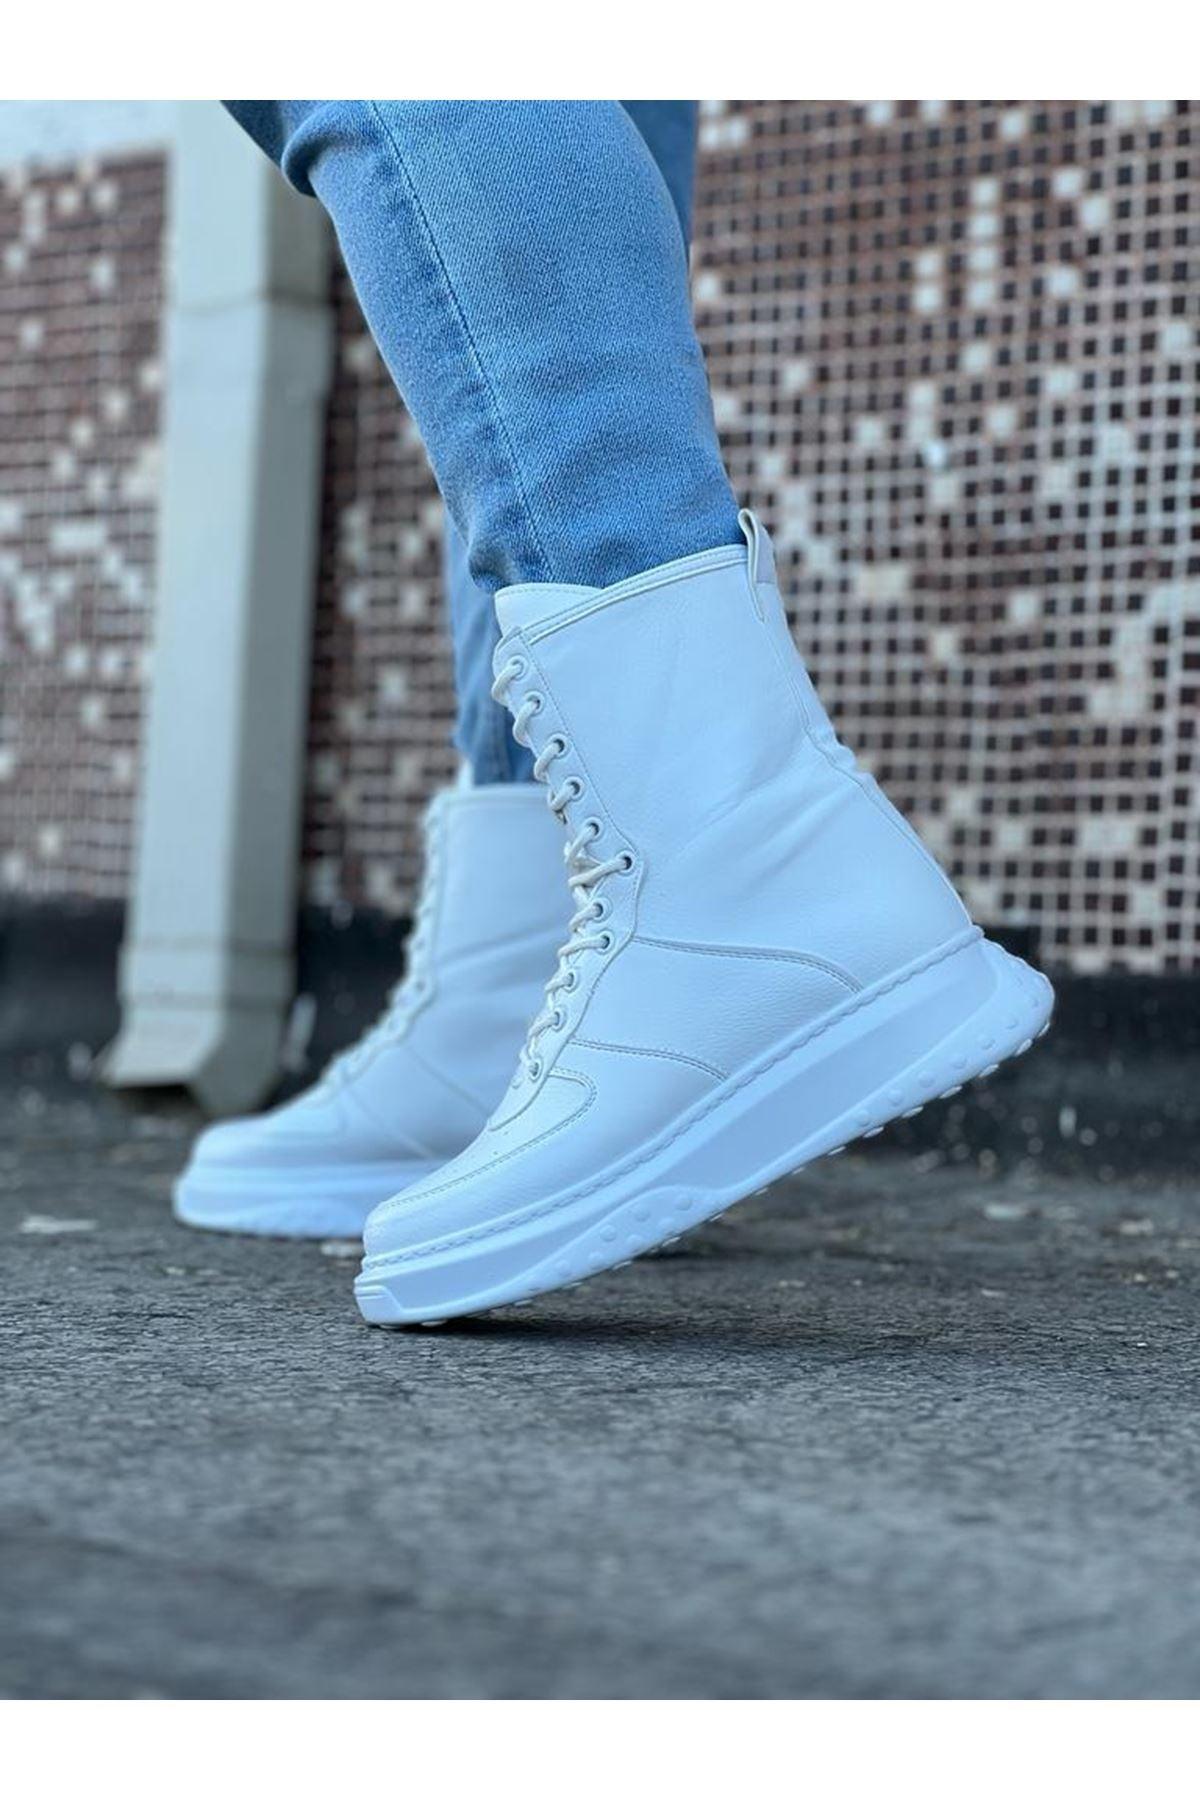 WG012 White Skin Long Lace-Up Boots - STREET MODE ™